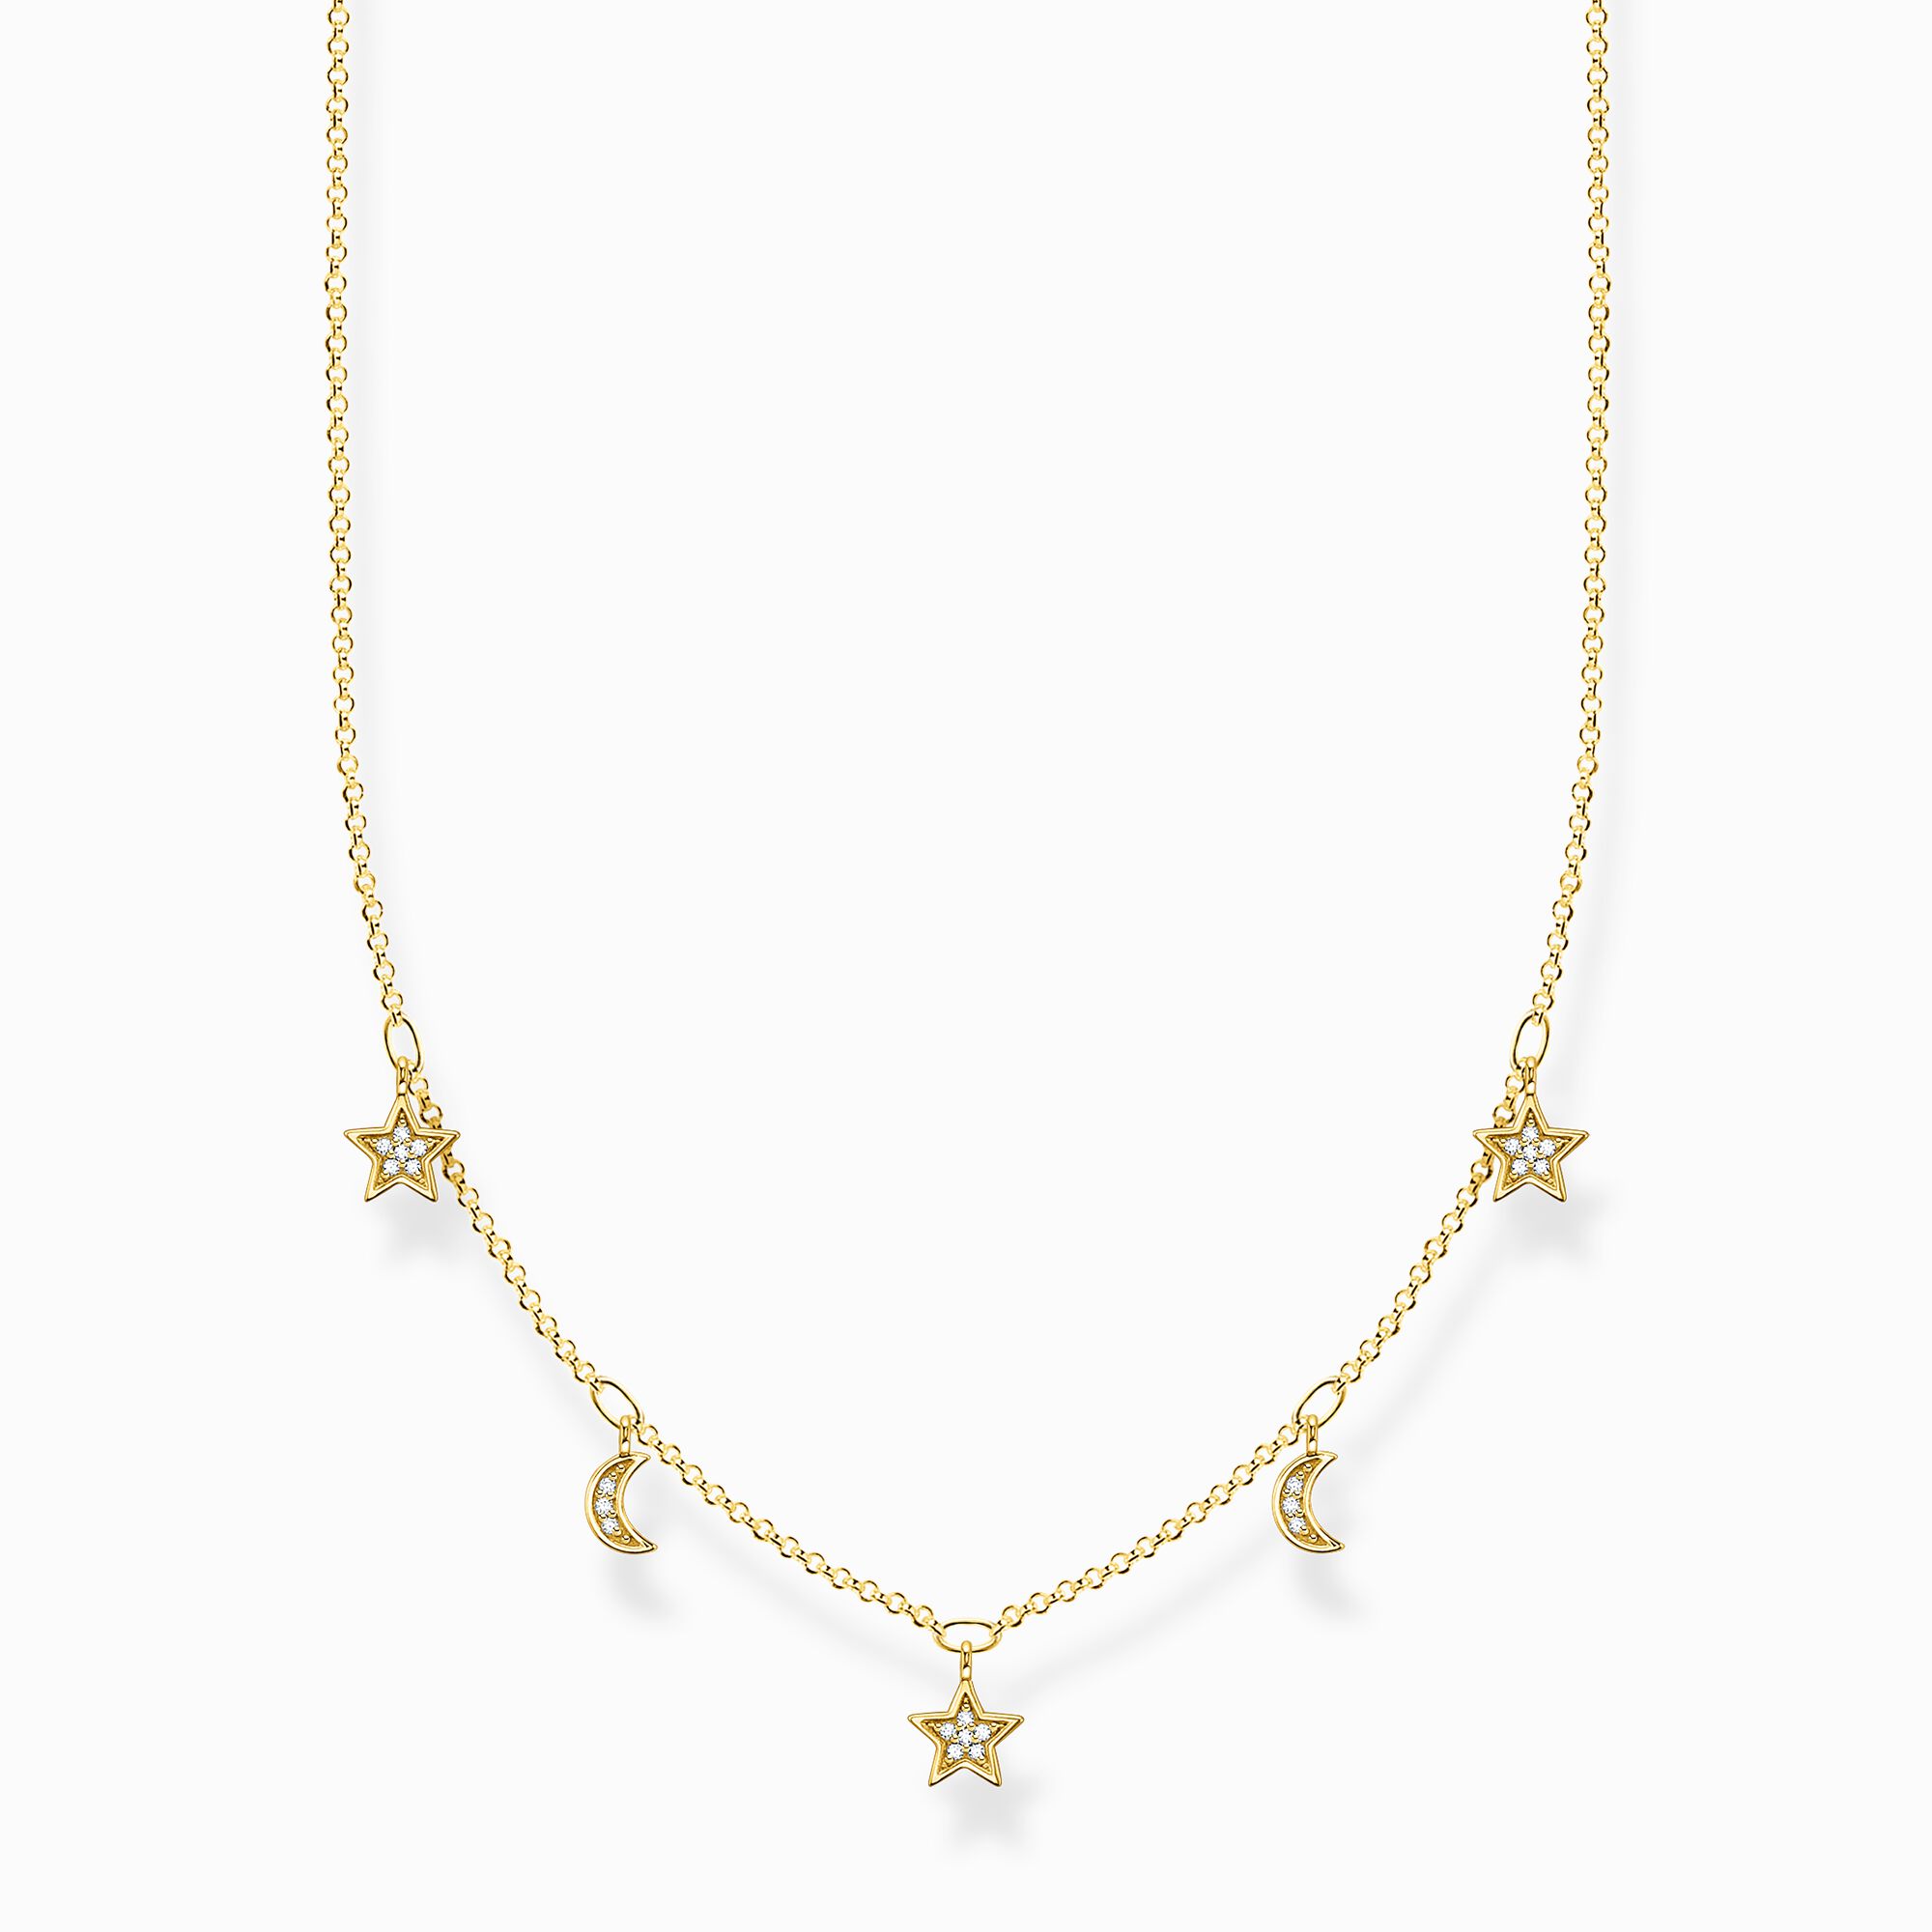 Necklace crescent moons and stars from the Charming Collection collection in the THOMAS SABO online store